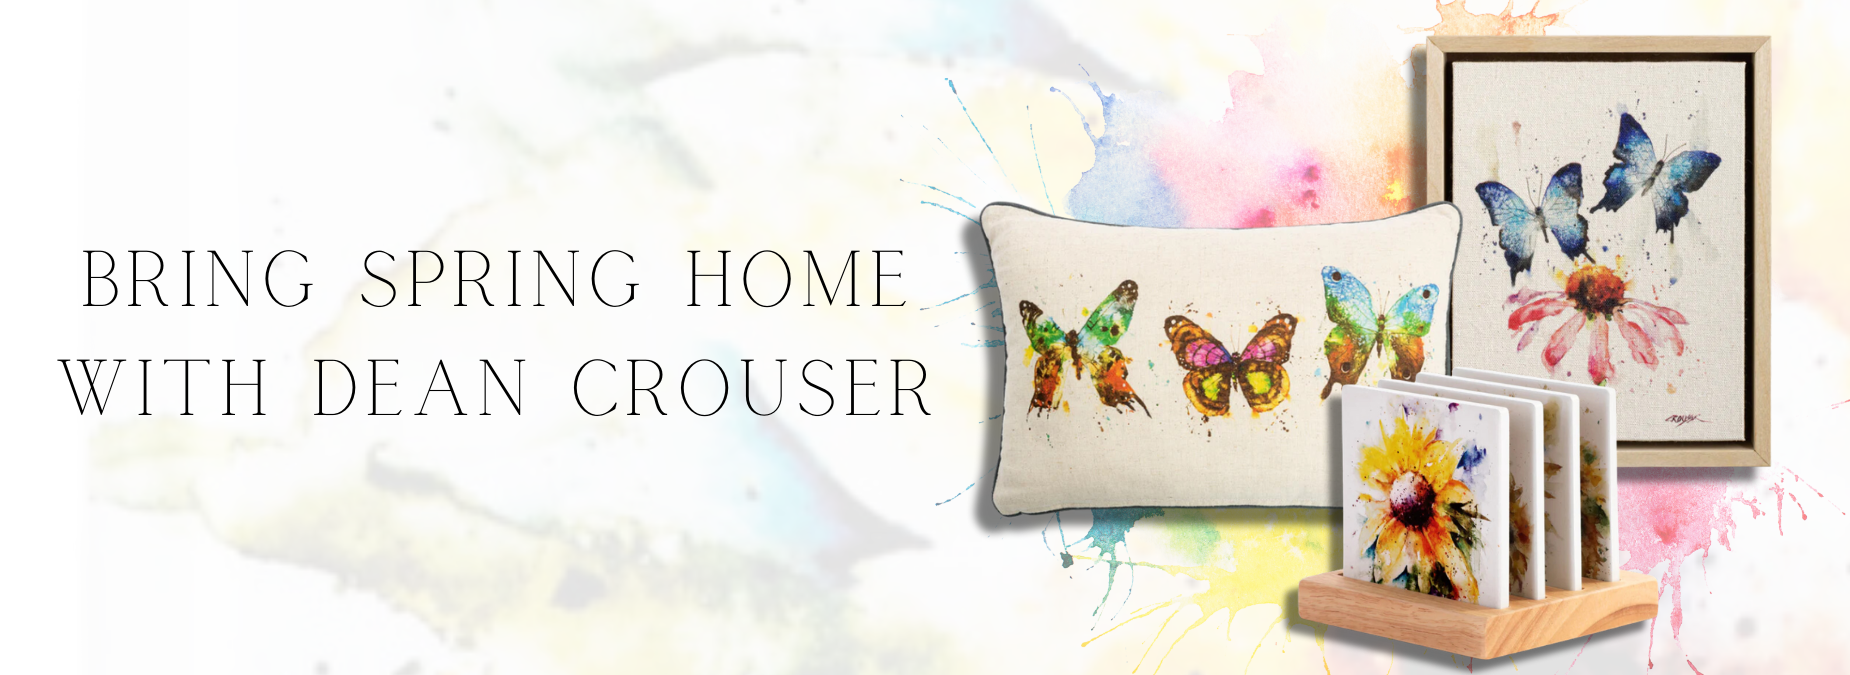 Bring Spring Home with Dean Crouser